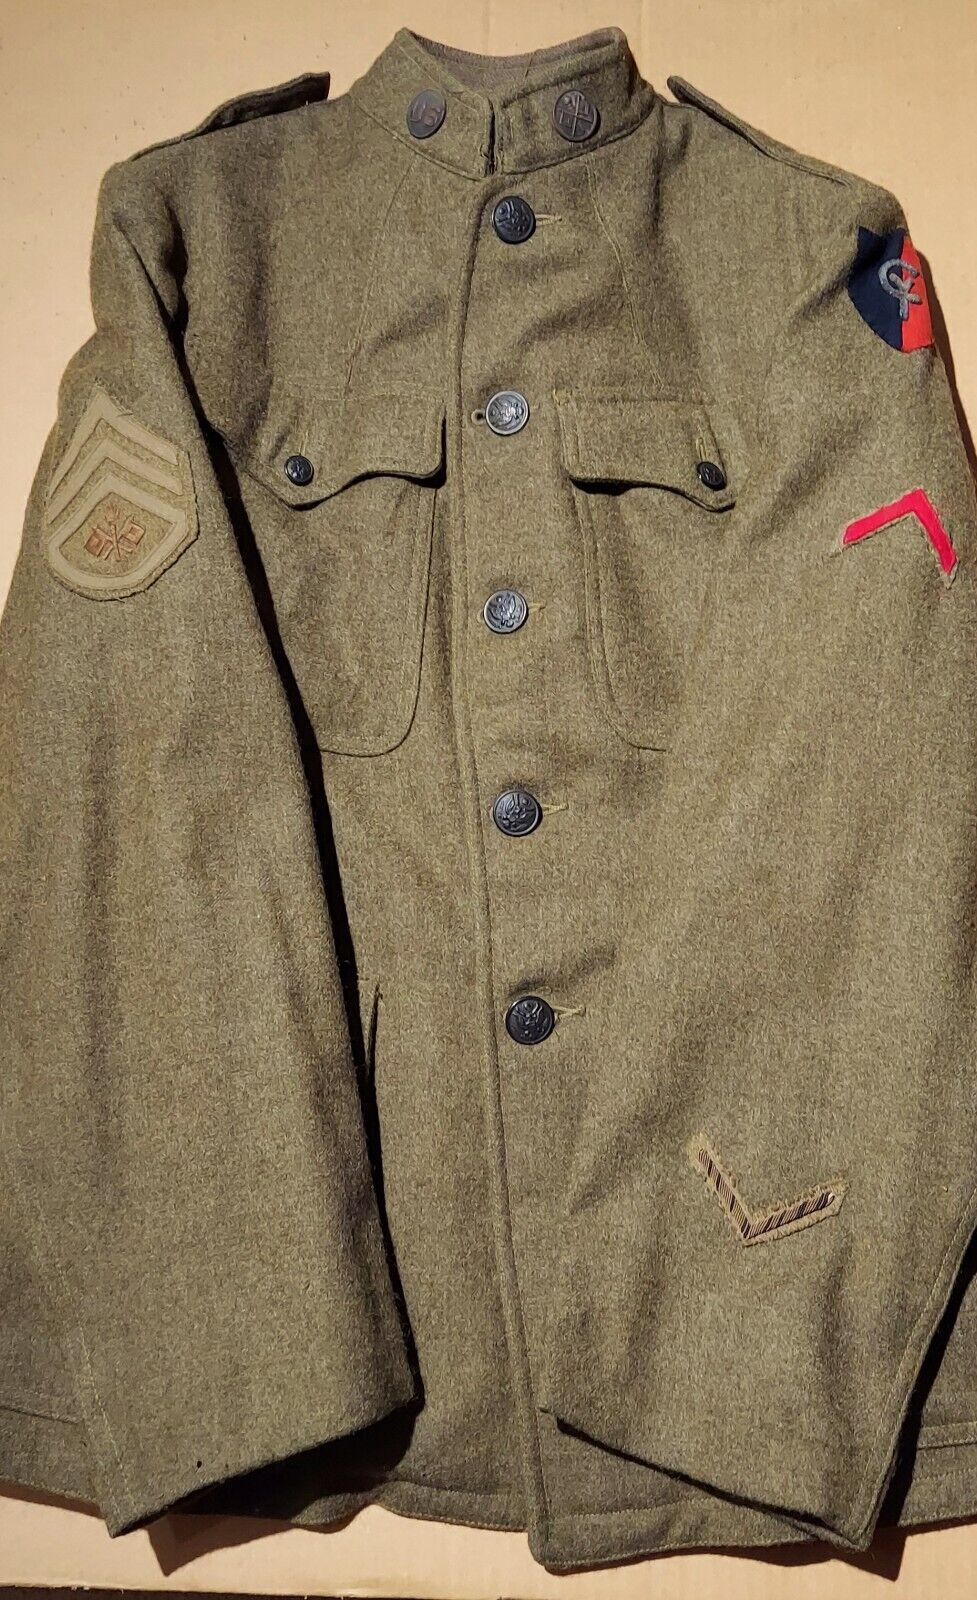 Original WWI U.S. Army Tunic Jacket - 38th Infantry Division Patch (Cyclone)